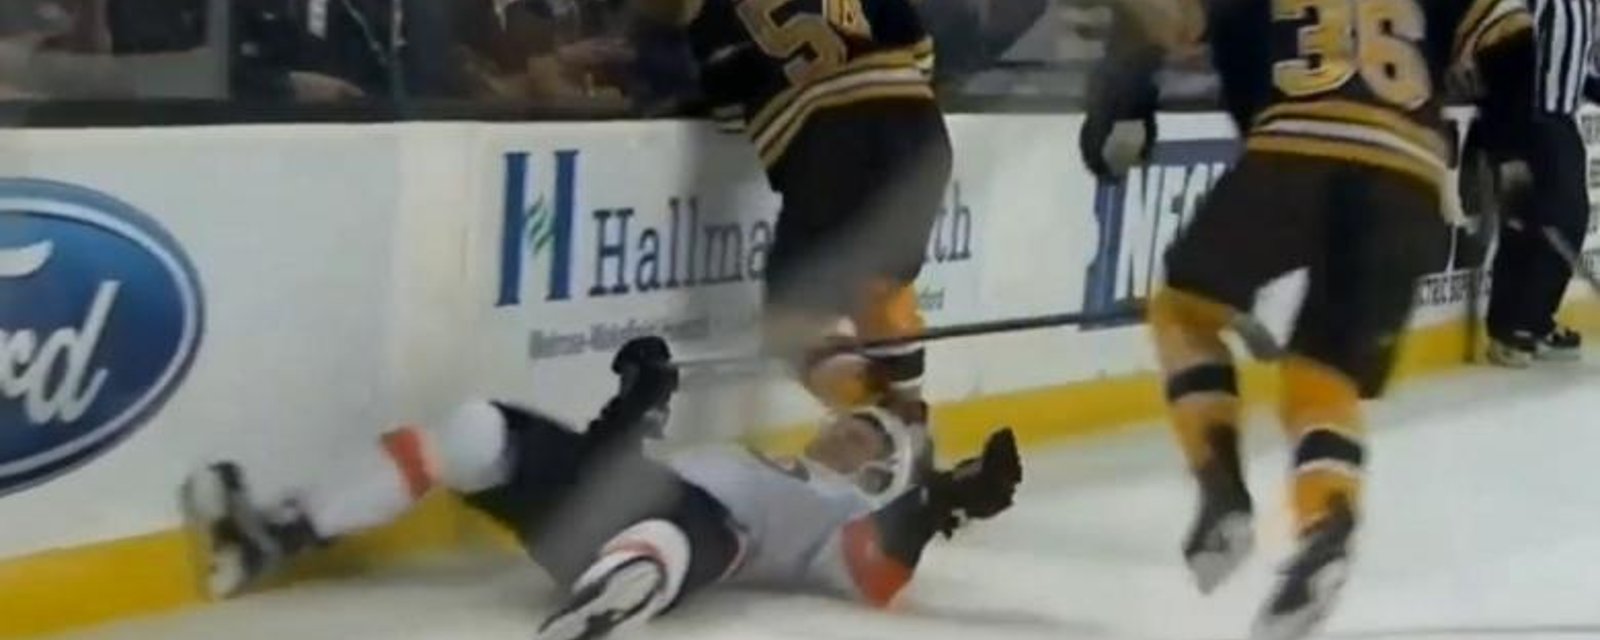 Breaking: Rinaldo knocks out former teammate with a very dirty hit.